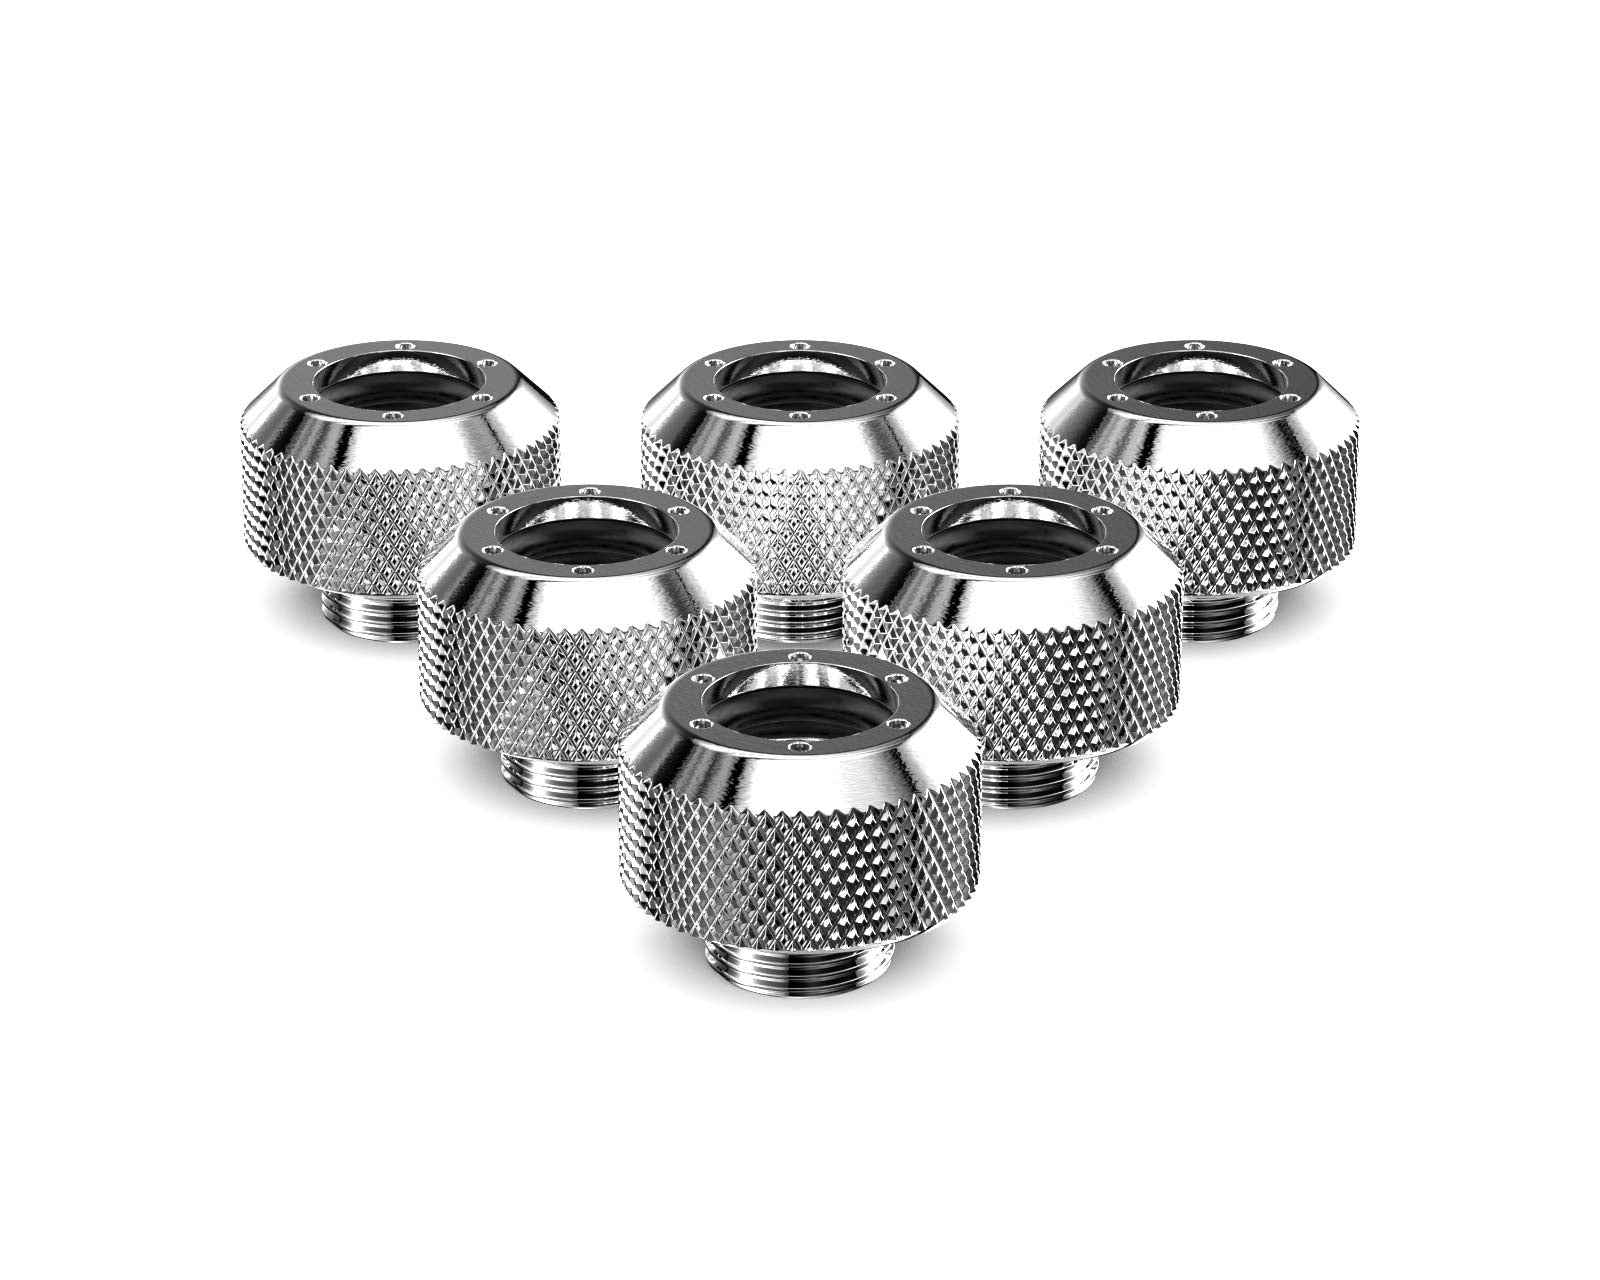 PrimoChill 1/2in. Rigid RevolverSX Series Fitting - 6 pack - PrimoChill - KEEPING IT COOL Silver Nickel